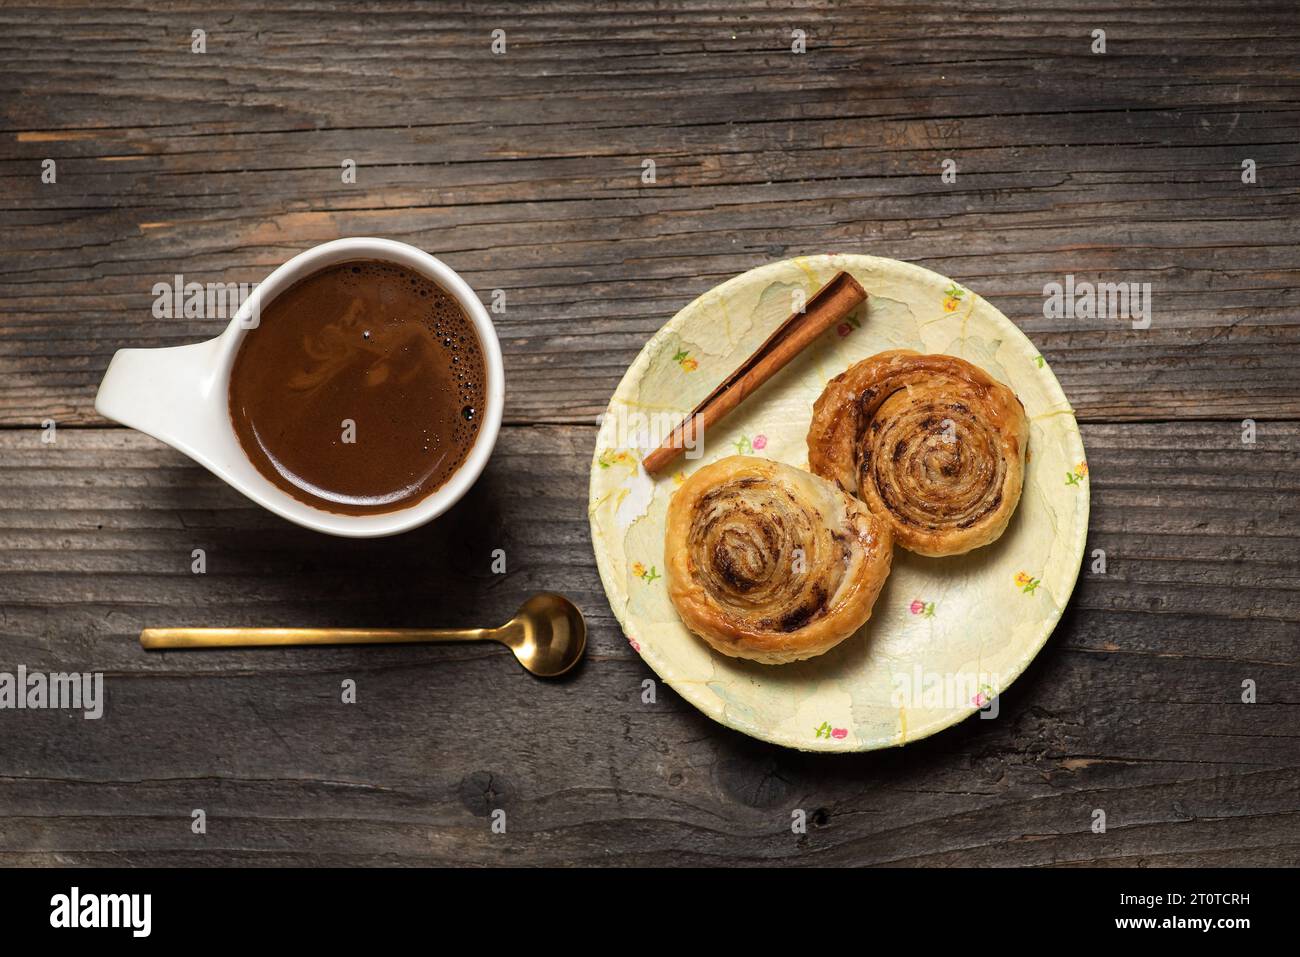 Freshly baked sweet and crispy cinnamon rolls. On a wooden background, with a cup of coffee Stock Photo